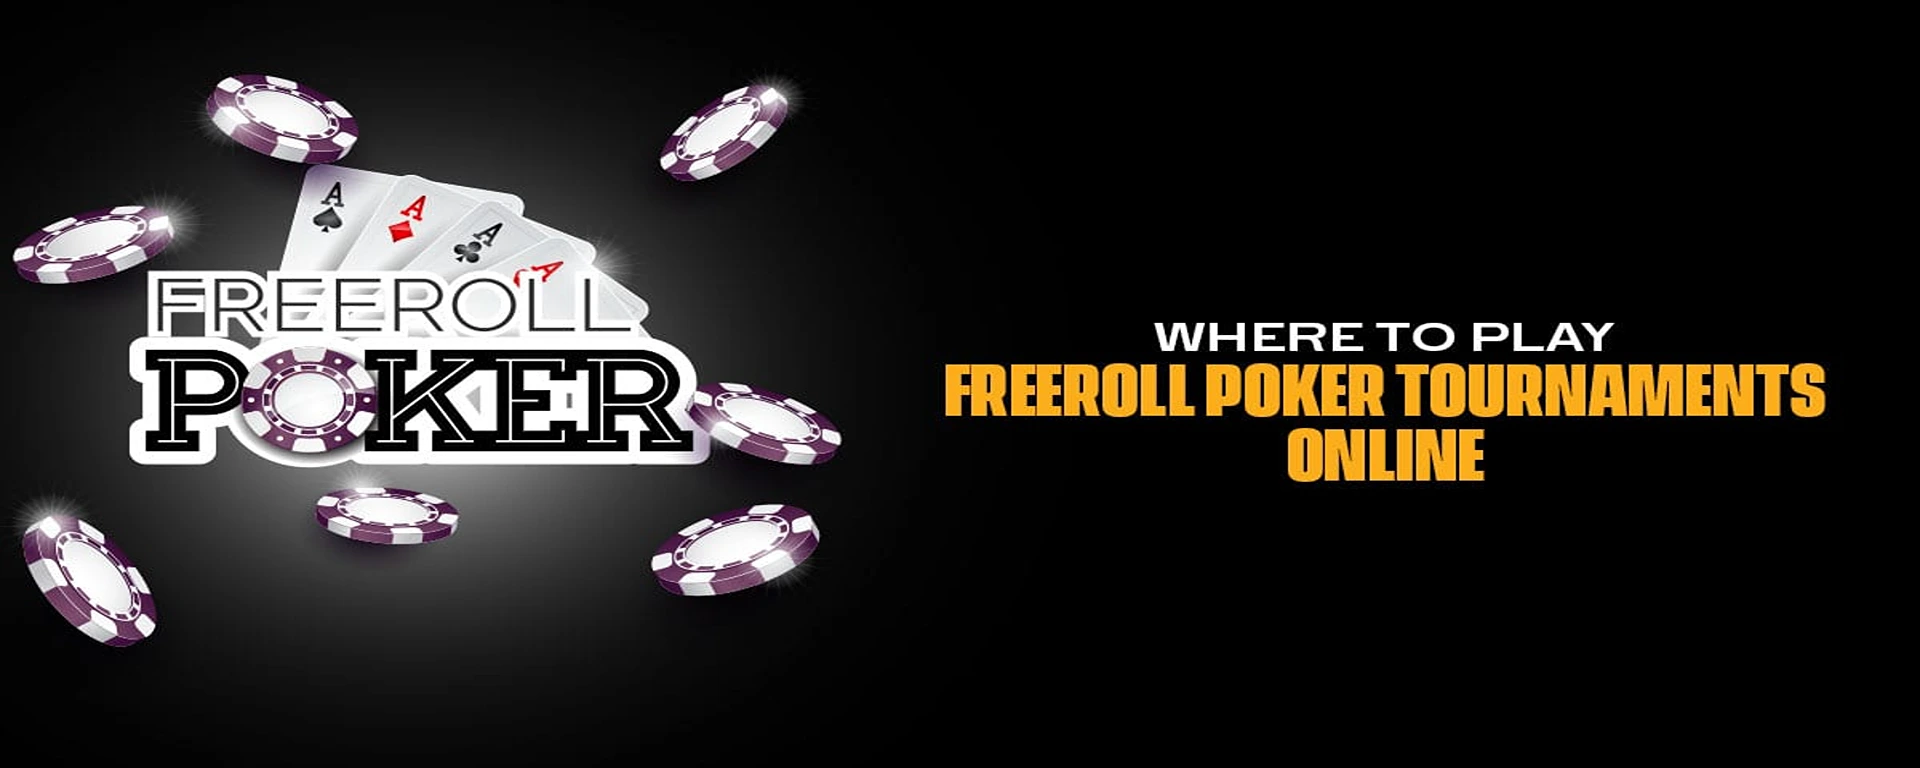 BLITZPOKER: Your Go-To Destination for Exciting Freeroll Poker Action